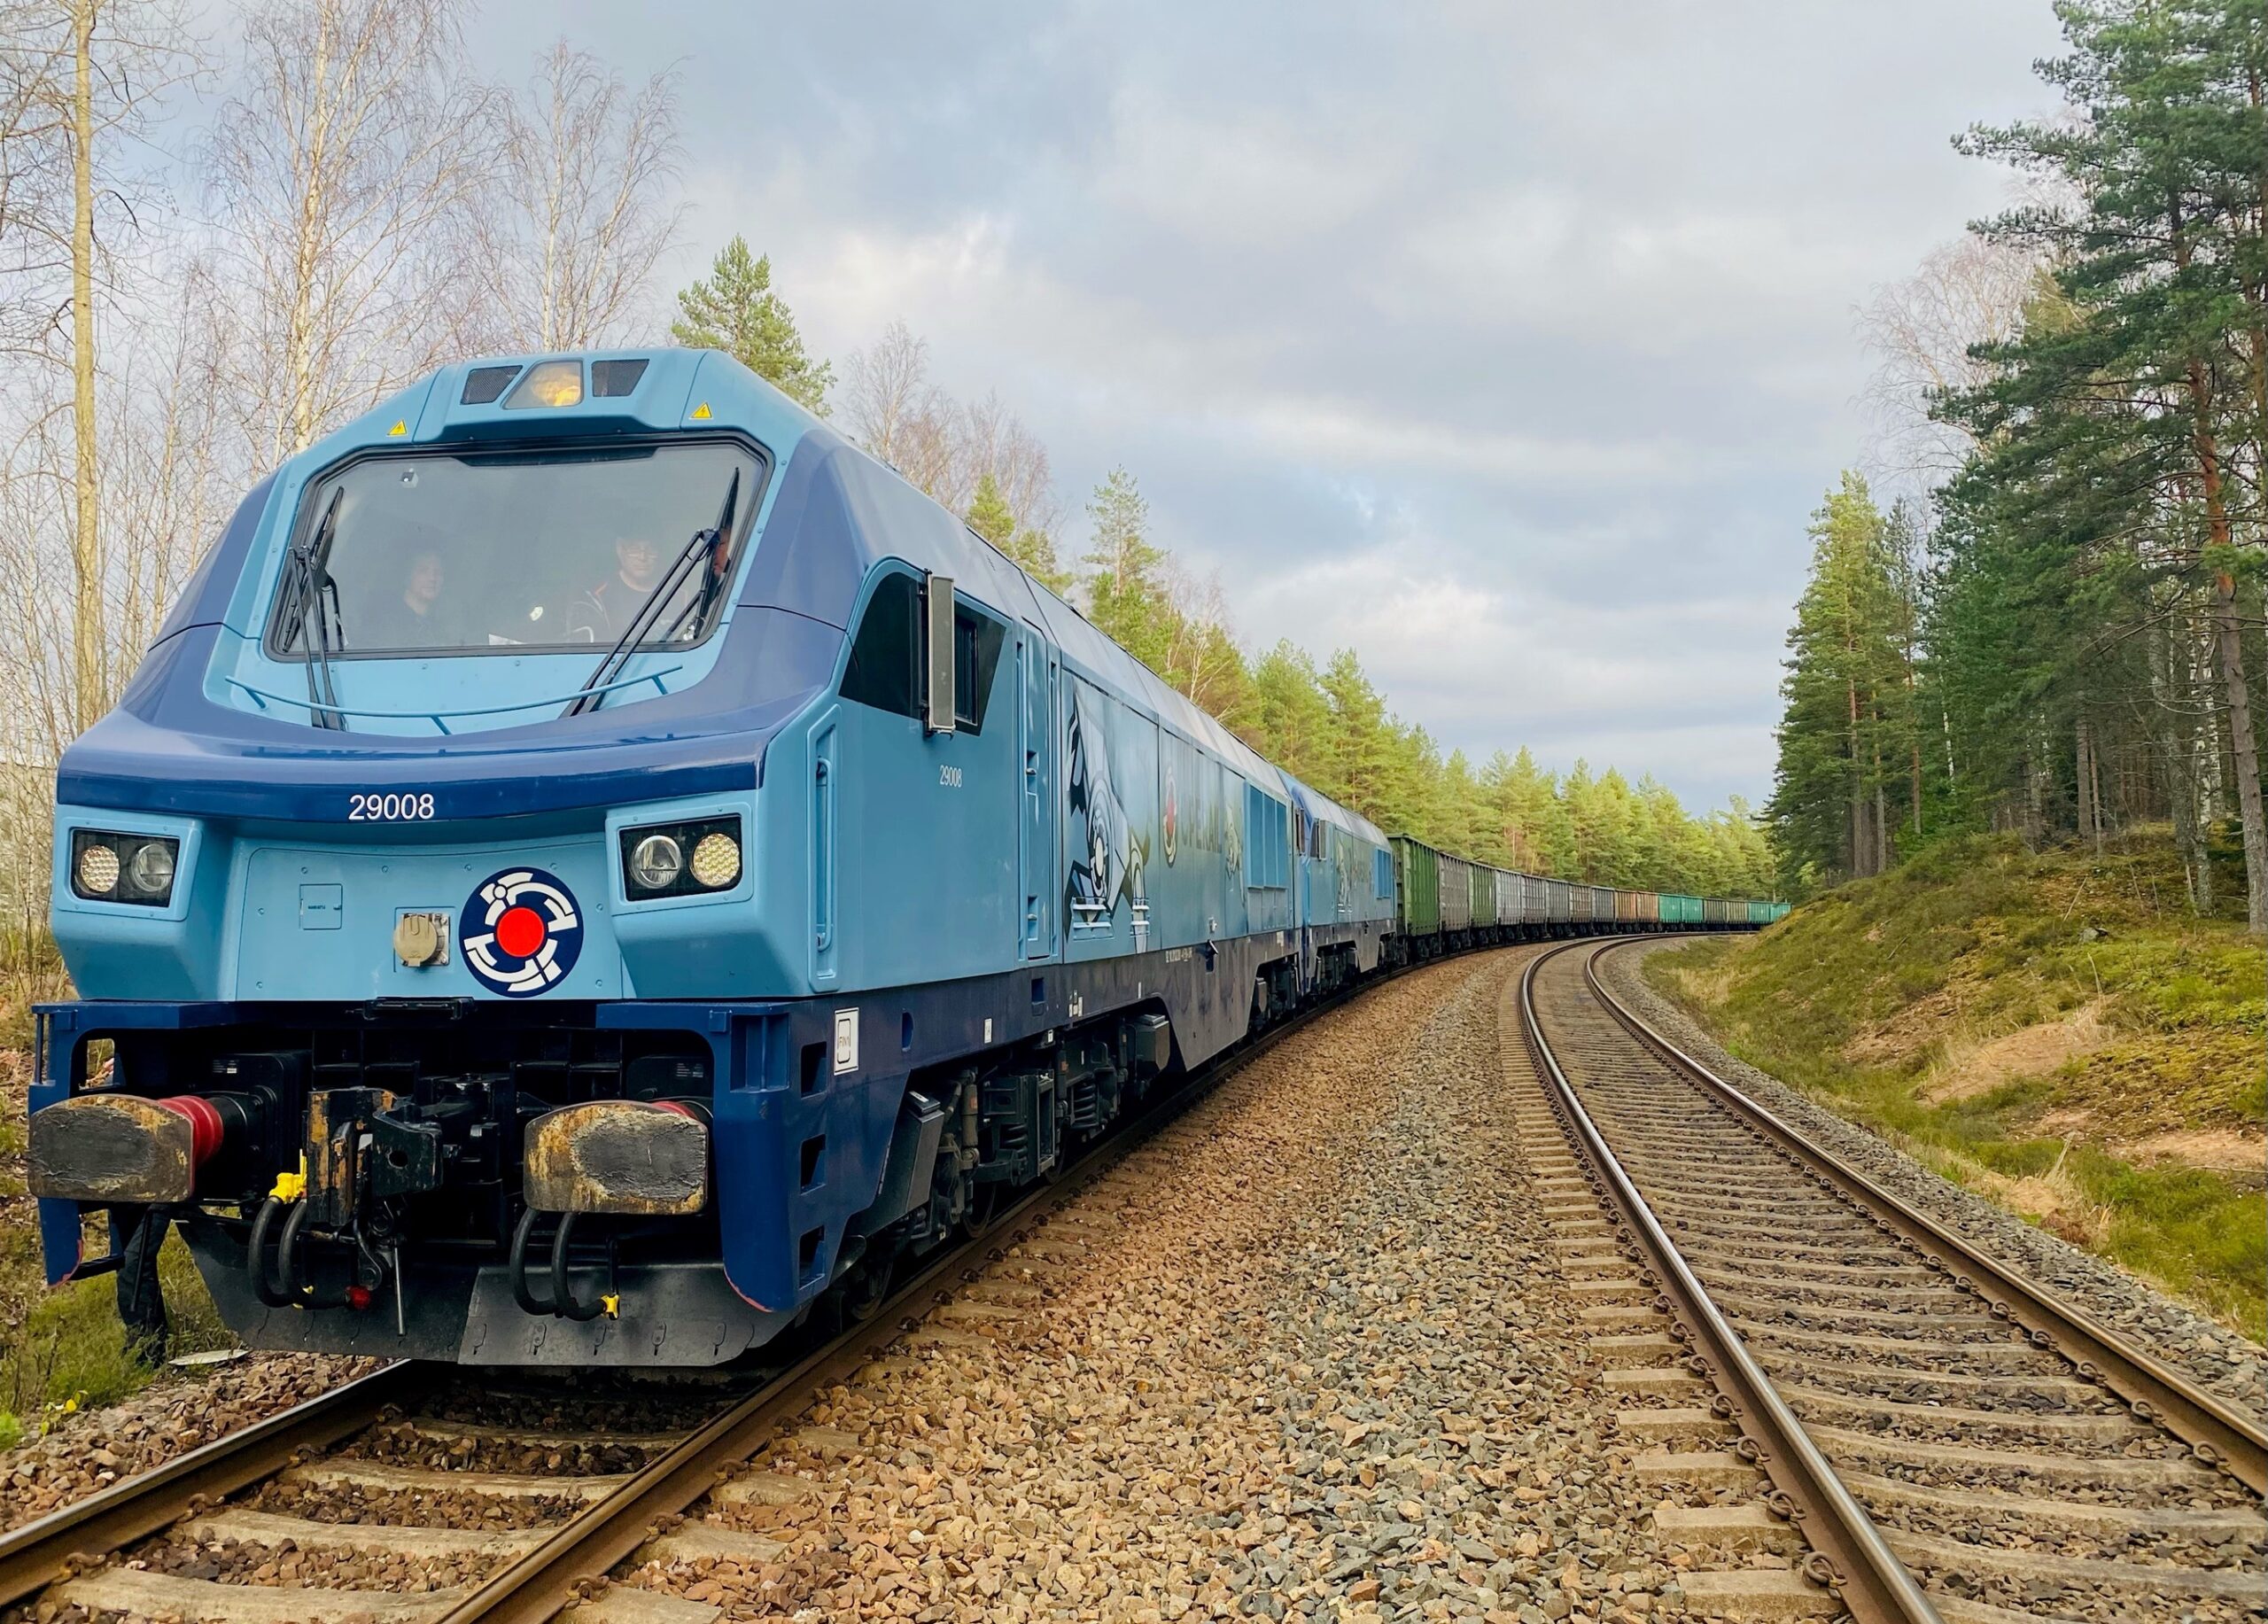 Operail has begun railway operations in Finland and cooperation with Rauanheimo, a leading port operator